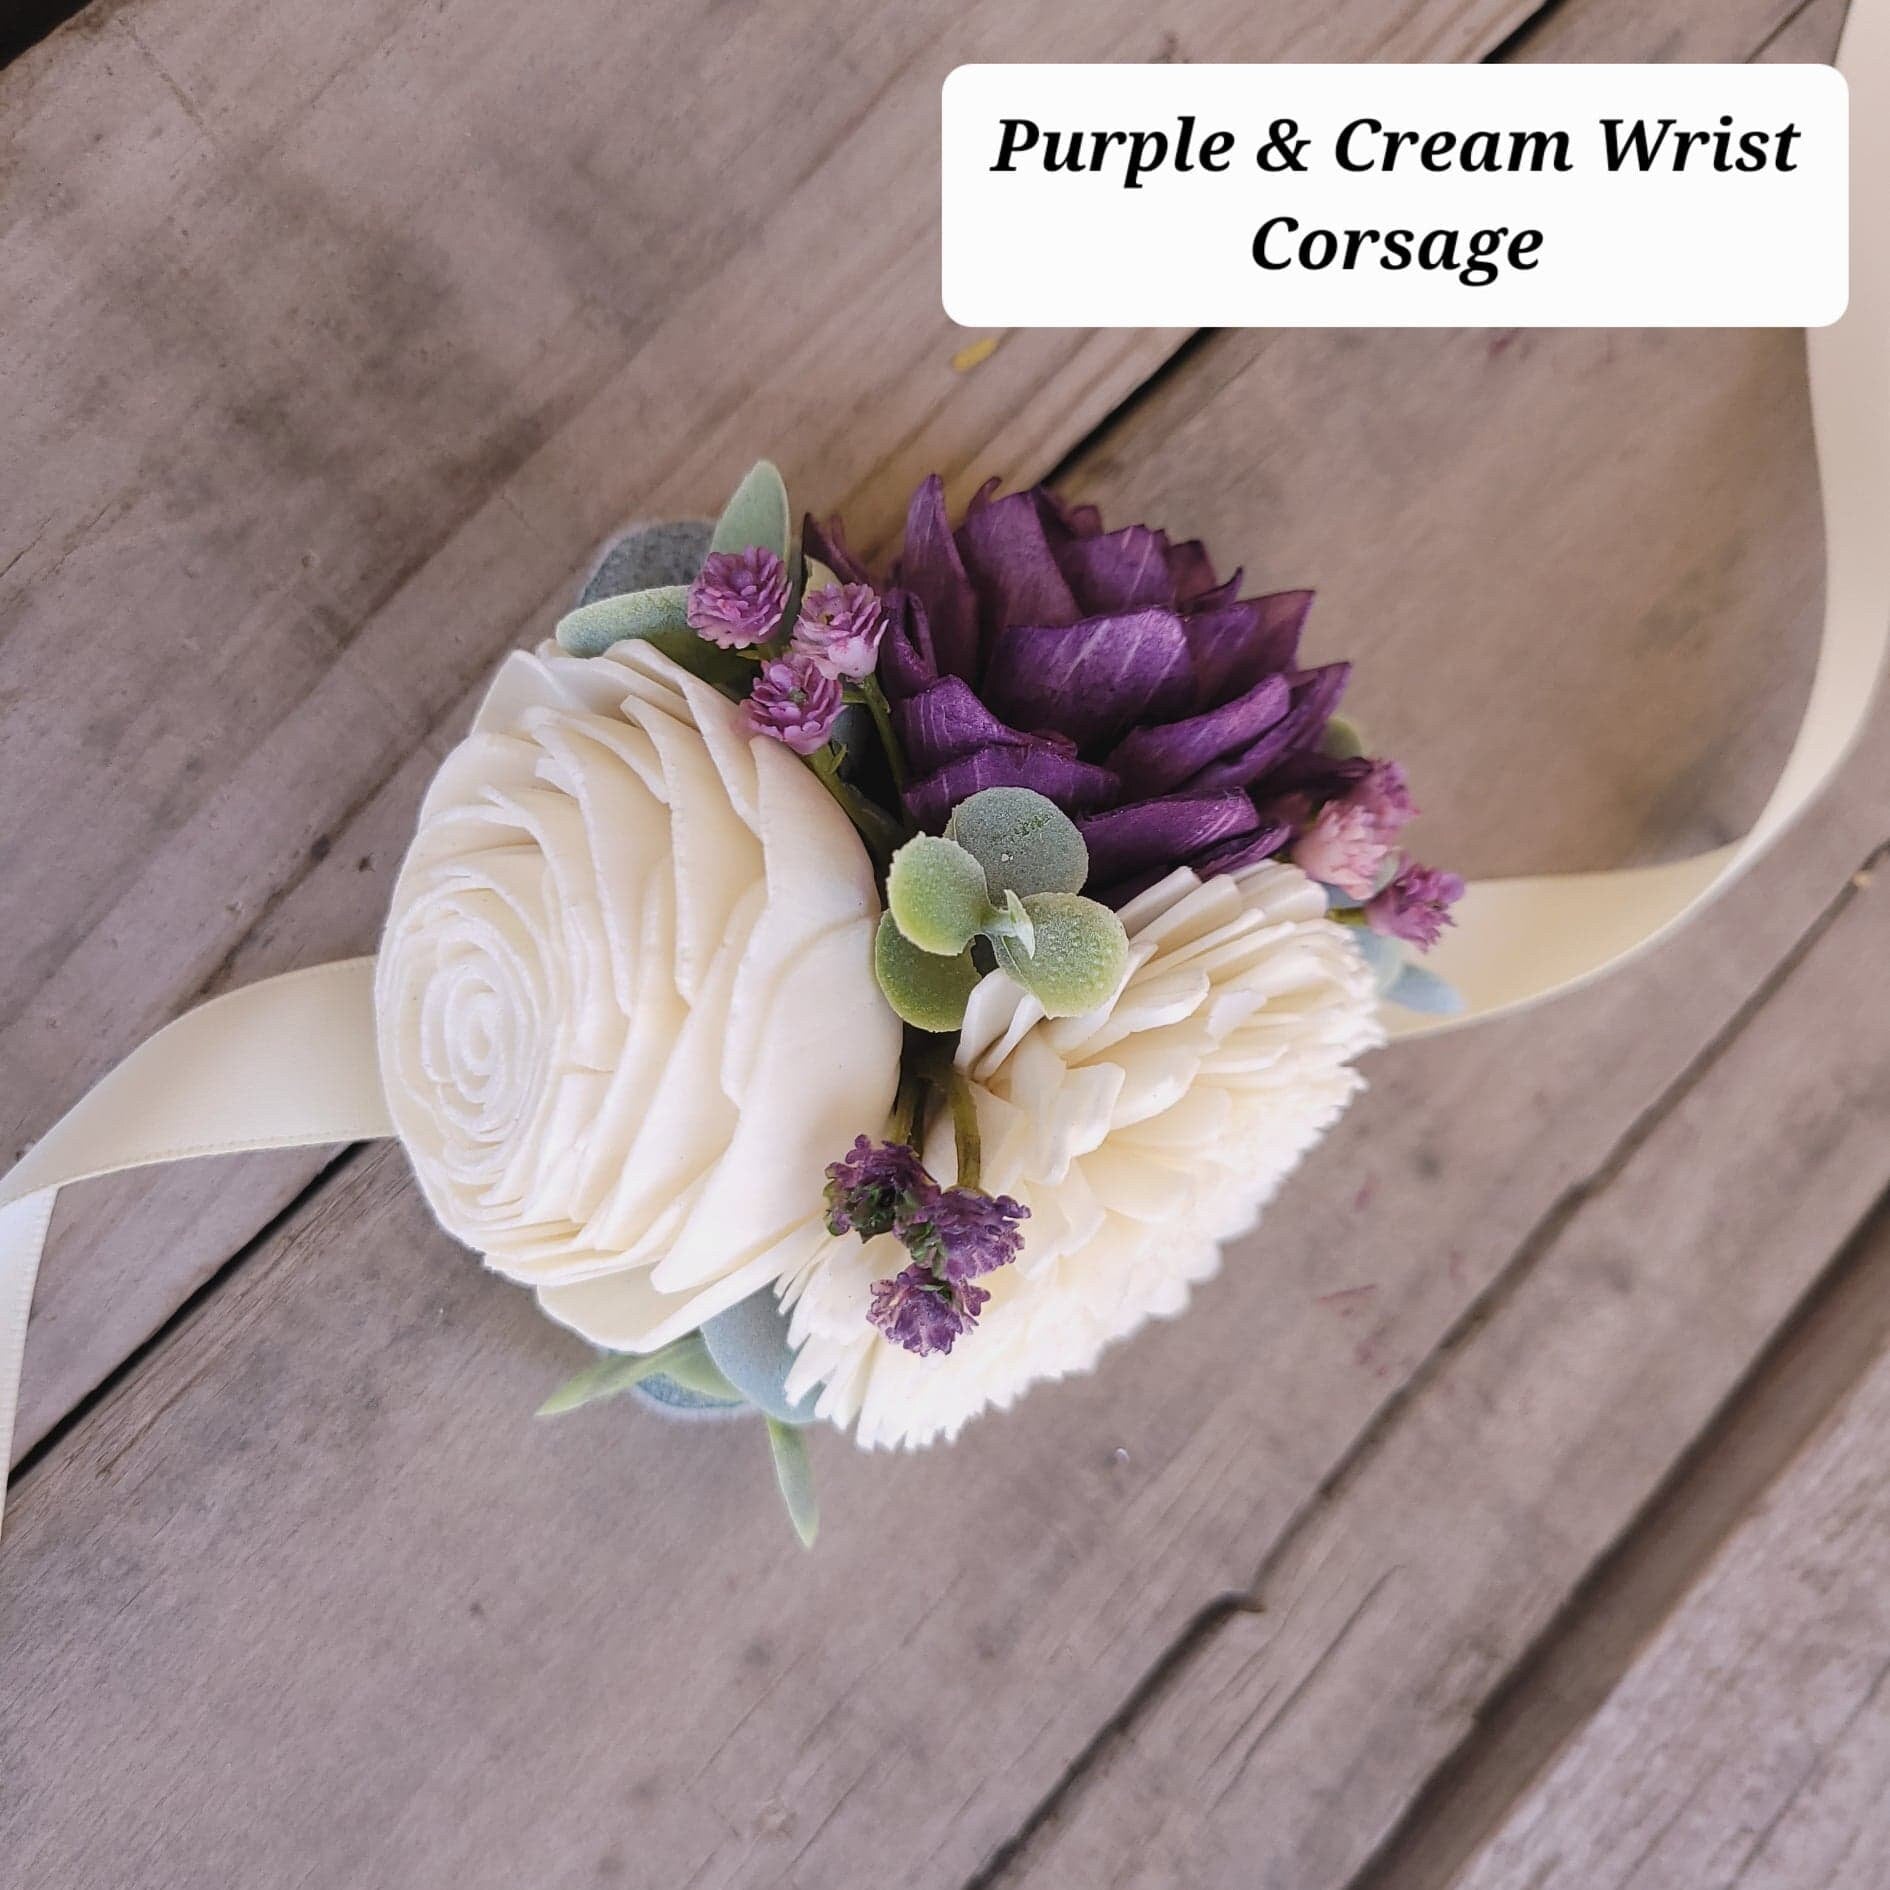 Corsage with Wood Flowers, Sola Wood Flower Wrist Corsage for Prom, Corsage Wristlet for Wedding